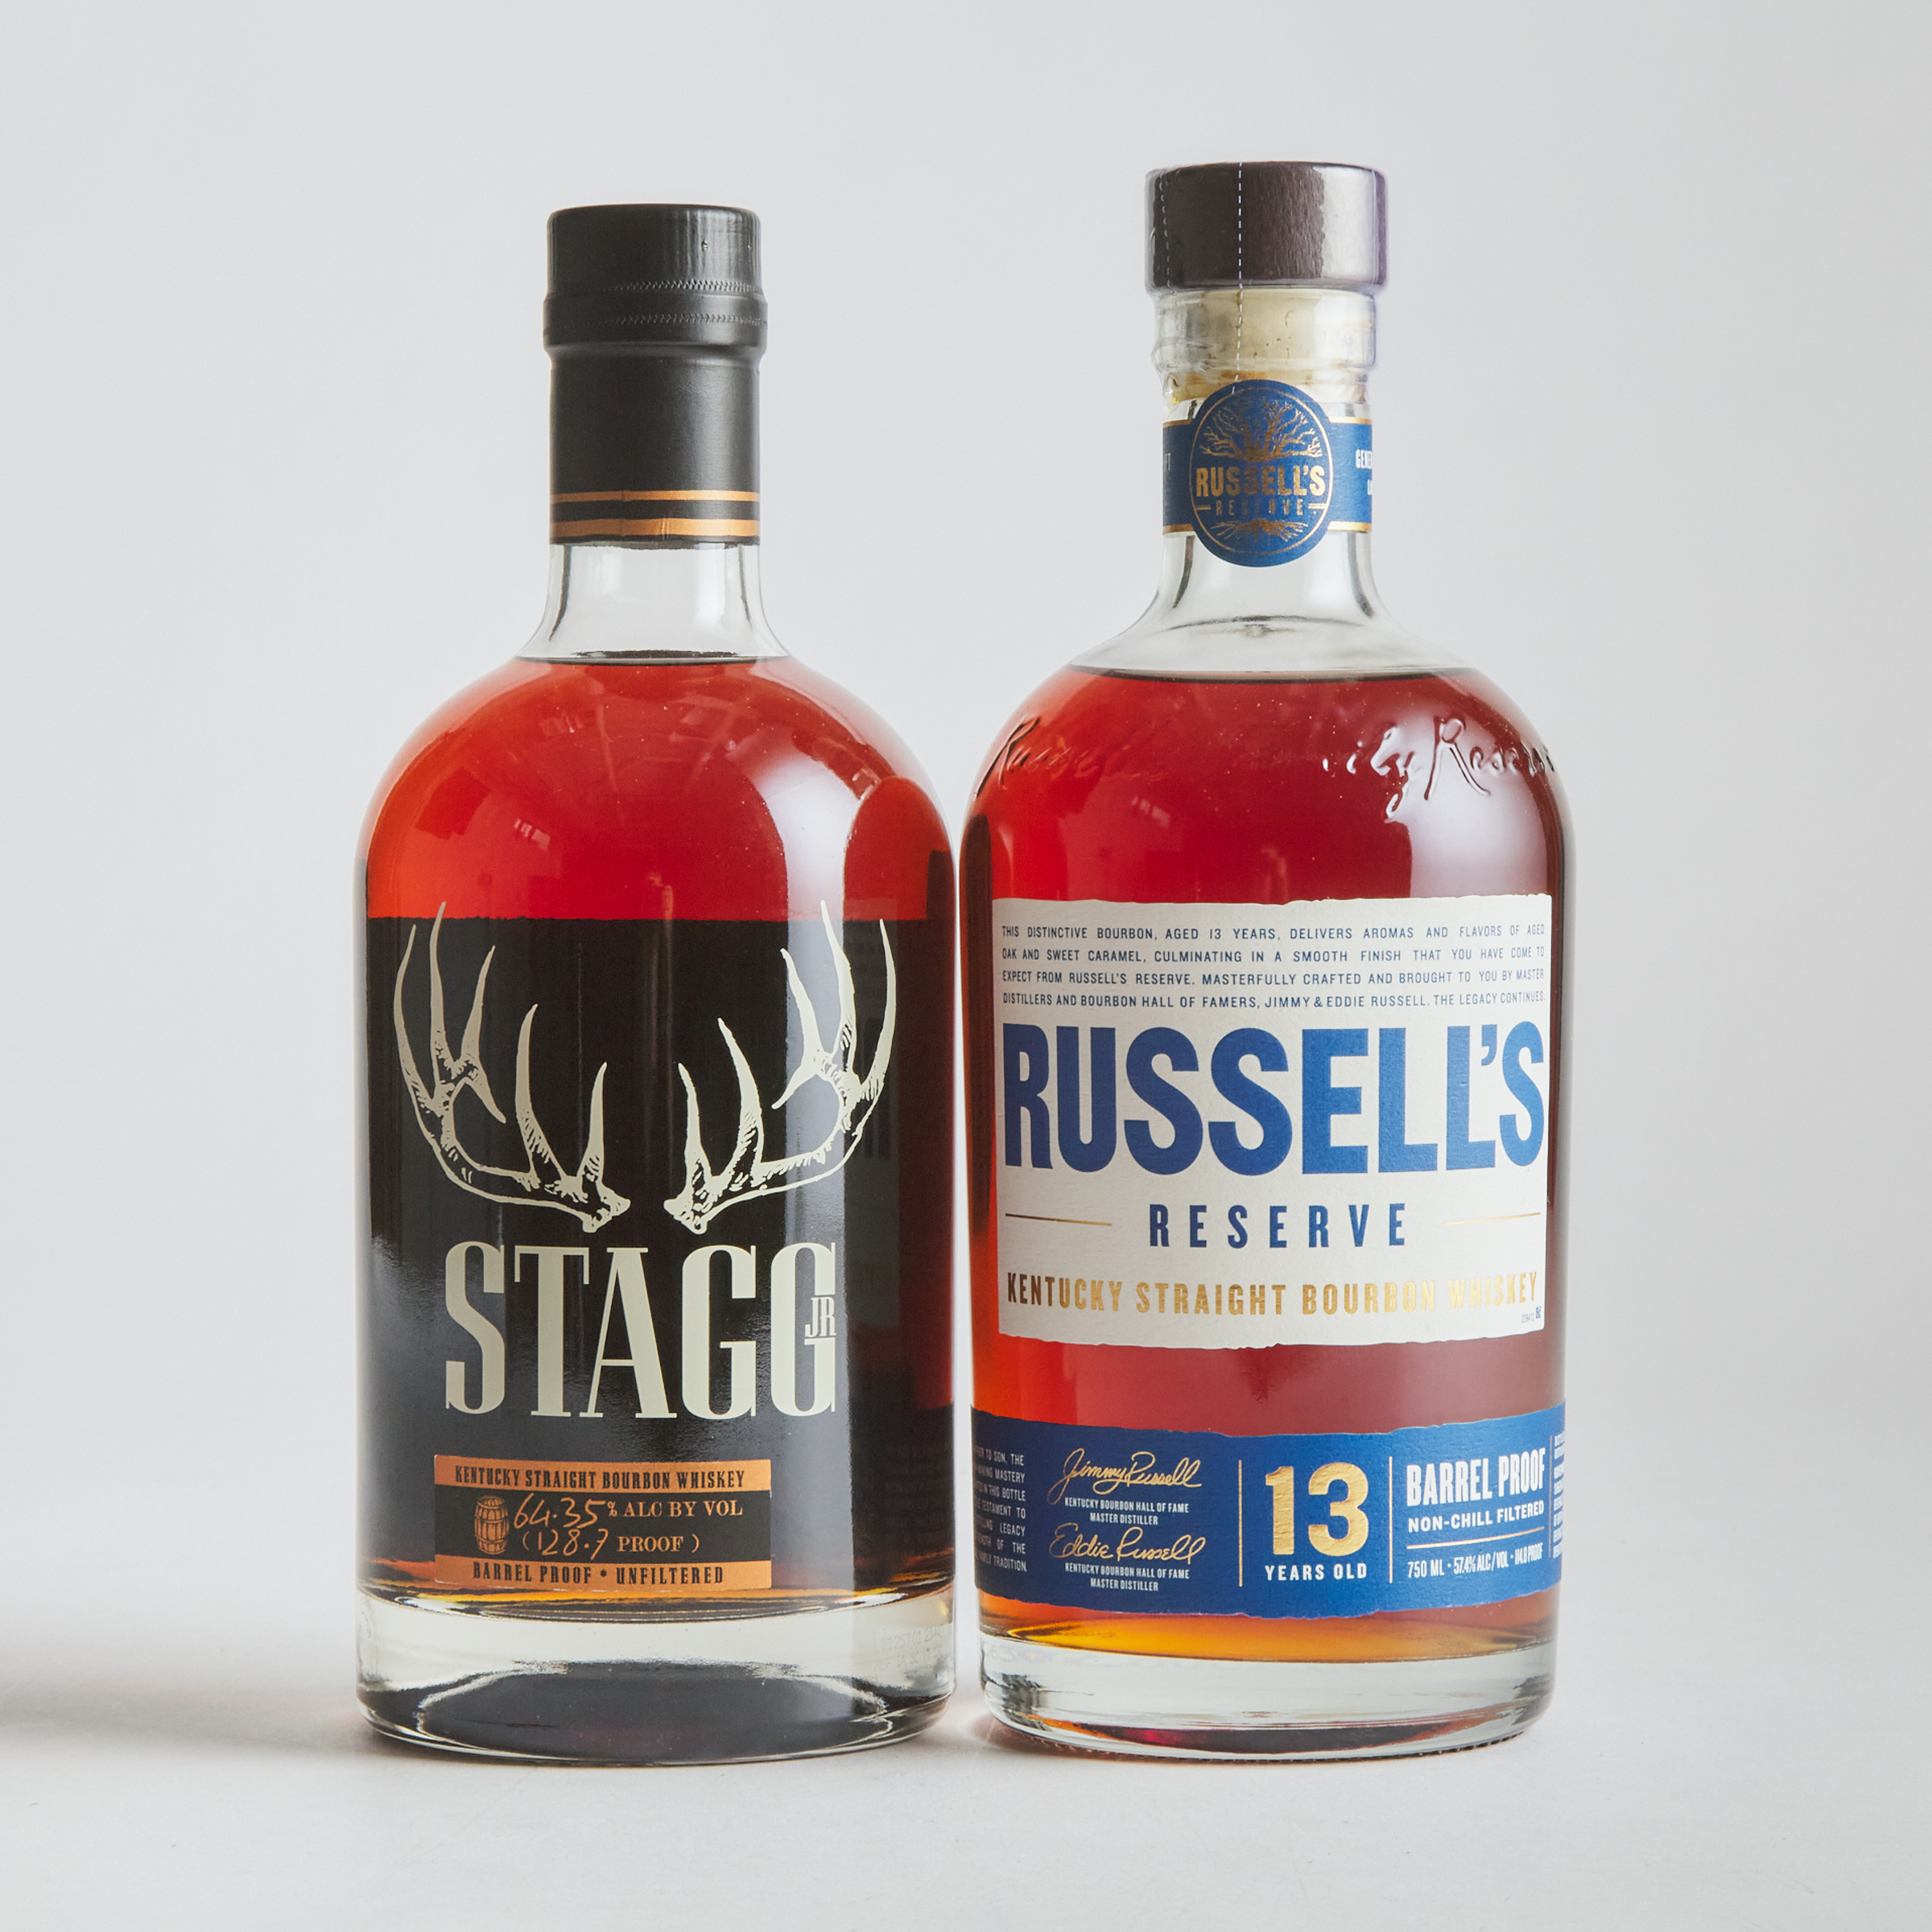 RUSSELL'S RESERVE STRAIGHT BOURBON WHISKEY 13 YEARS (ONE 750 ML)
STAGG JR. KENTUCKY STRAIGHT BOURBON WHISKEY (ONE 750 ML)